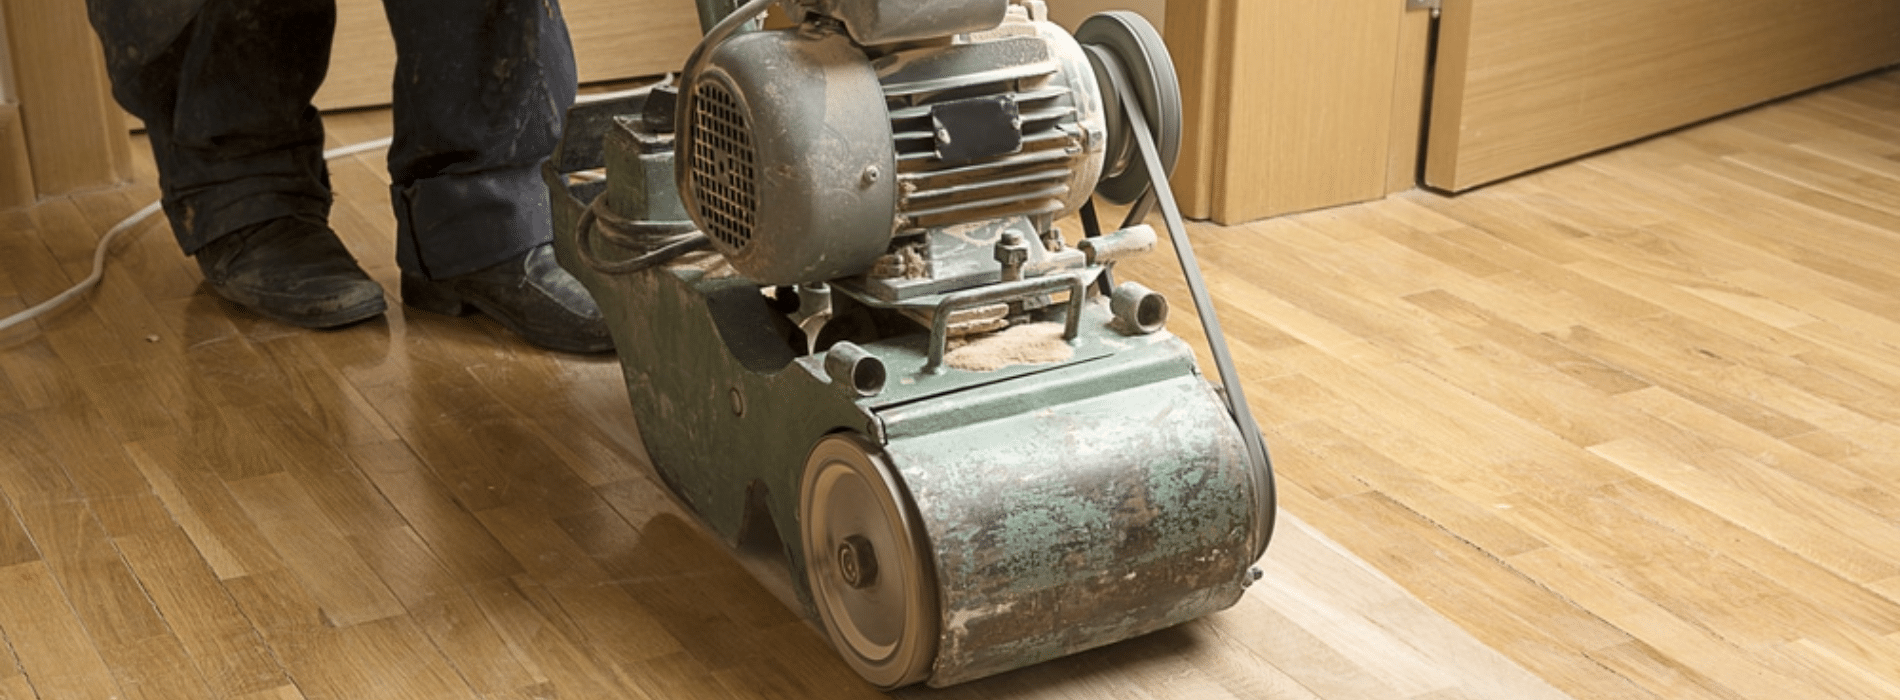 Mr Sander® use a Bona Scorpion drum sander (200 mm, 1.5 kW) connected to a dust extraction system with a HEPA filter (240V, 50Hz) for sanding parquet floors in Bethnal Green, E2. This setup ensures clean and efficient results. 